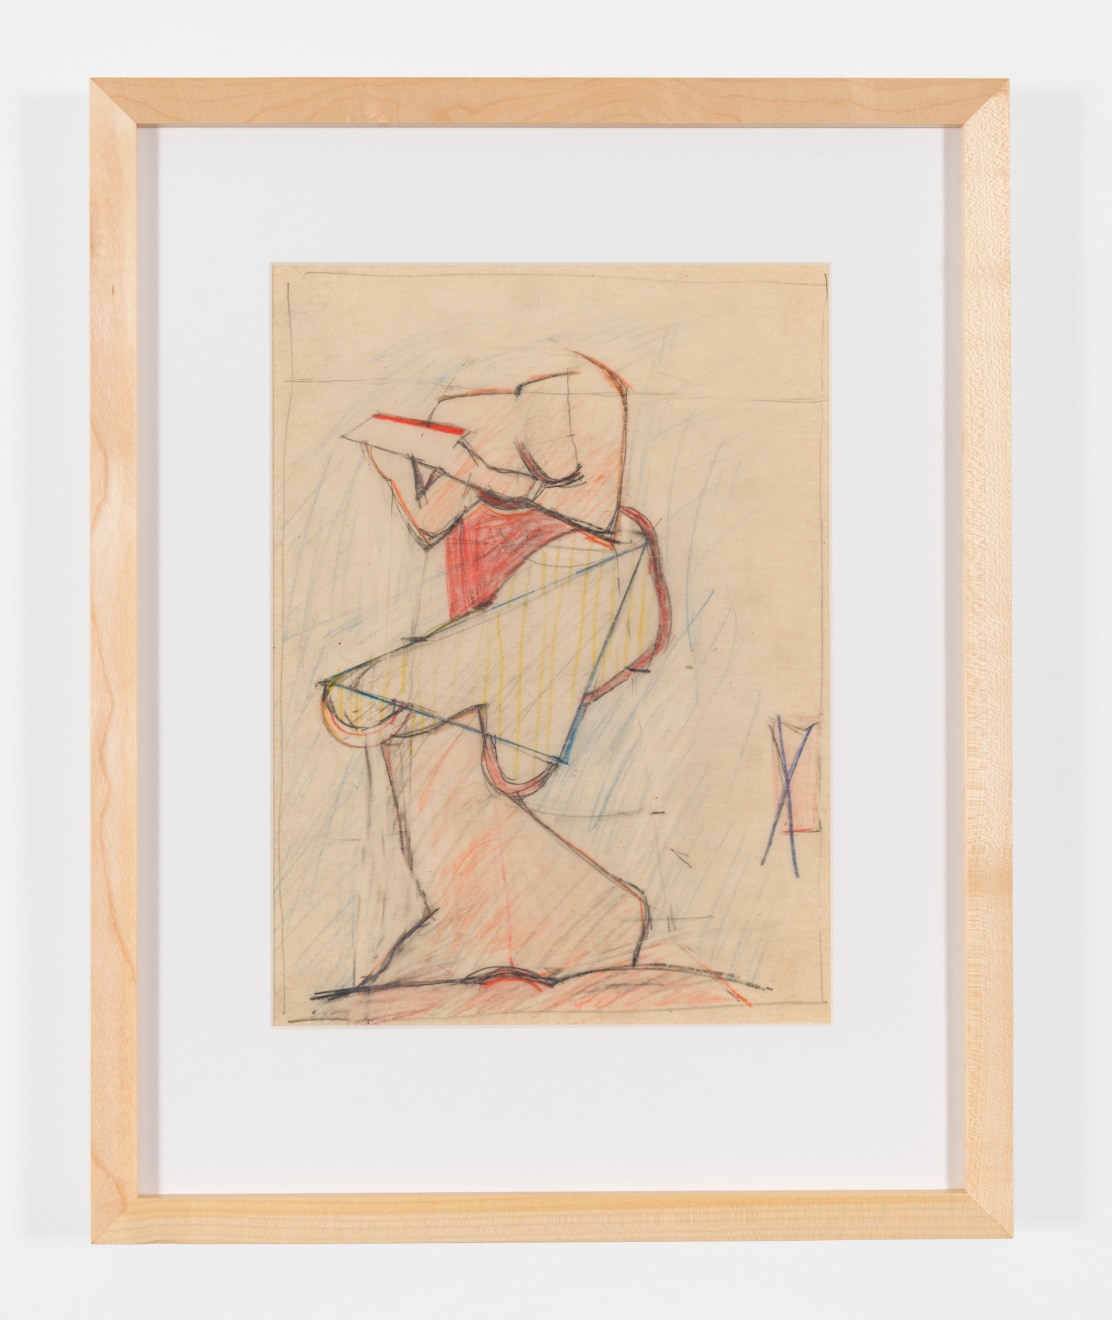 Untitled, 1968-1969, pencil on paper